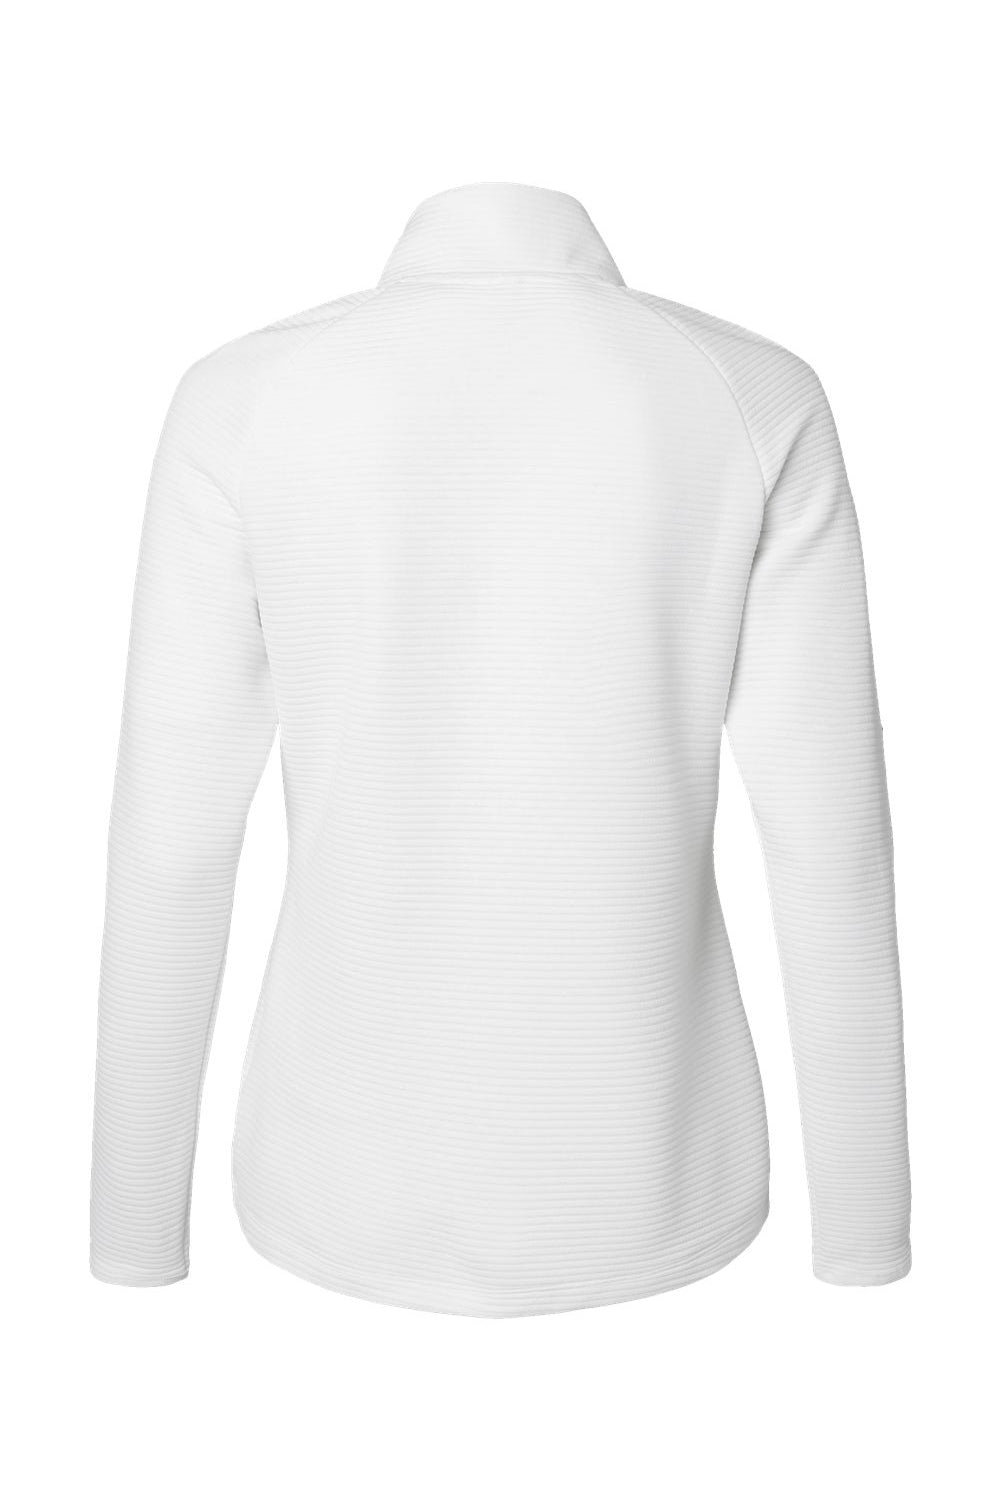 Adidas A589 Womens Spacer 1/4 Zip Pullover Core White Flat Back